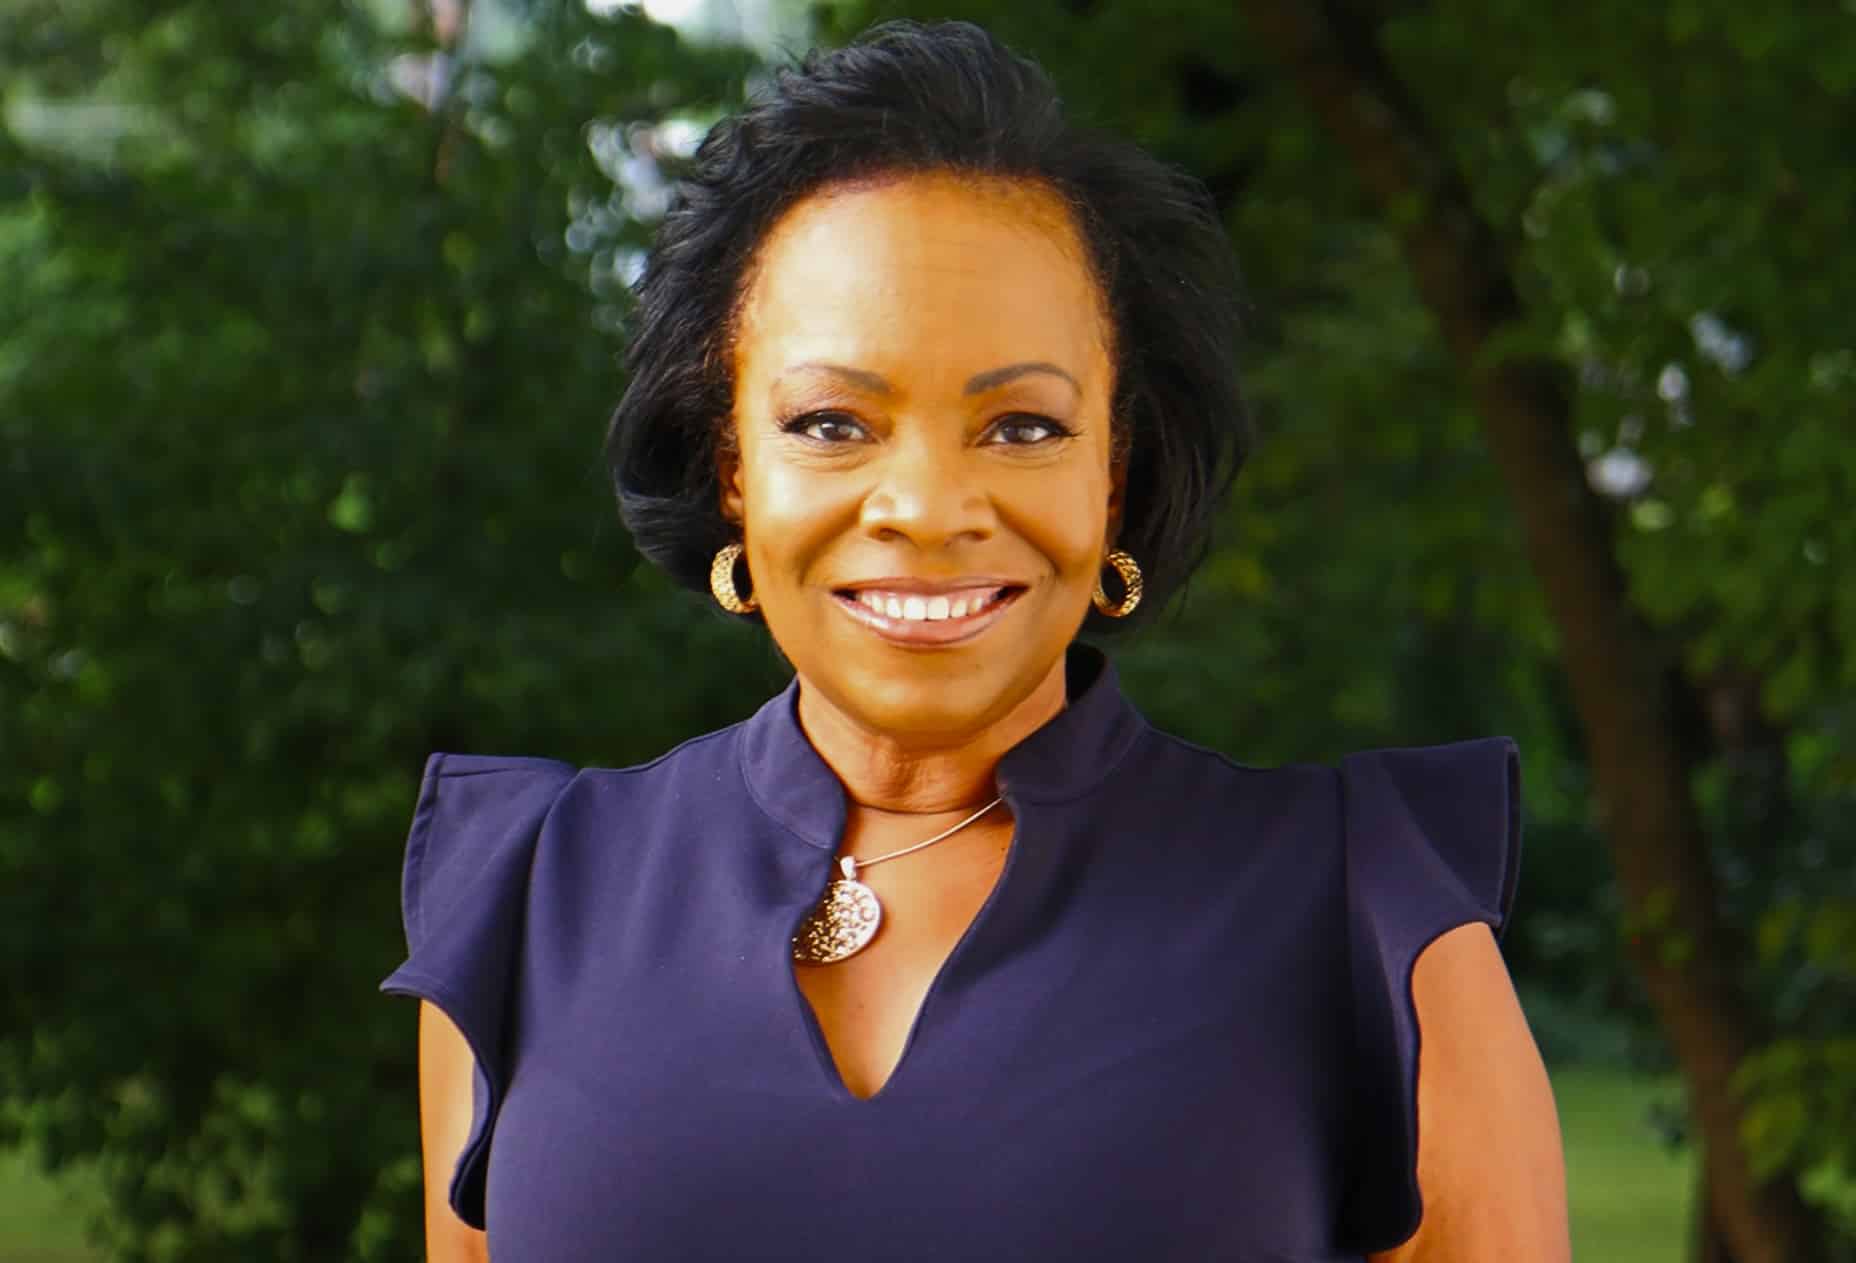 A headshot of Beverly Burks, regional director of philanthropy and public relations for National Church Residences and mayor of Clarkston, Georgia.